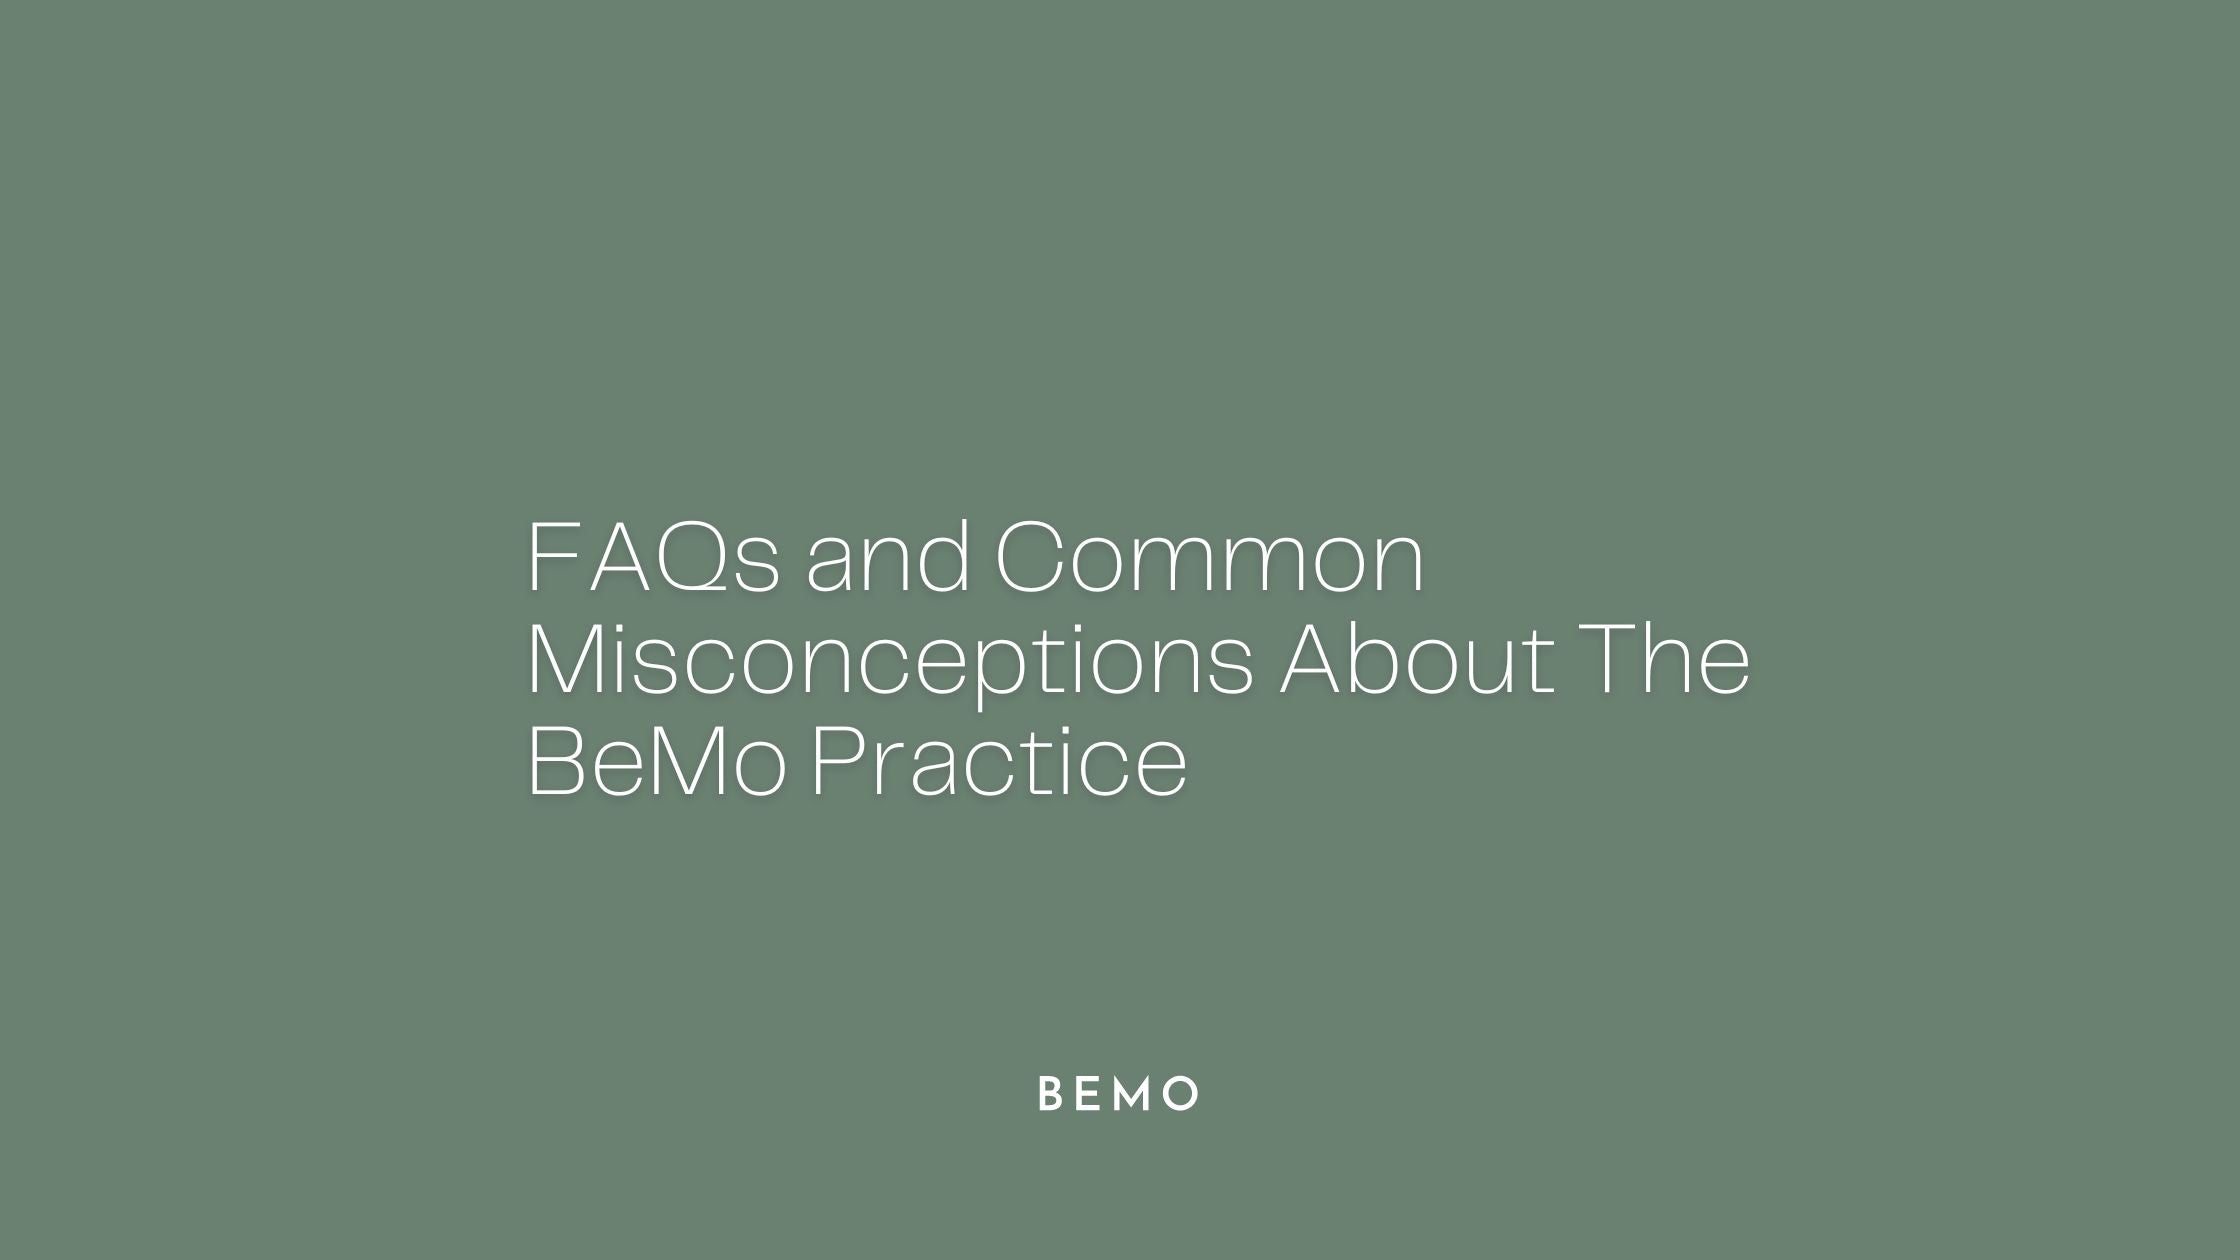 FAQs and Common Misconceptions About The BeMo Practice